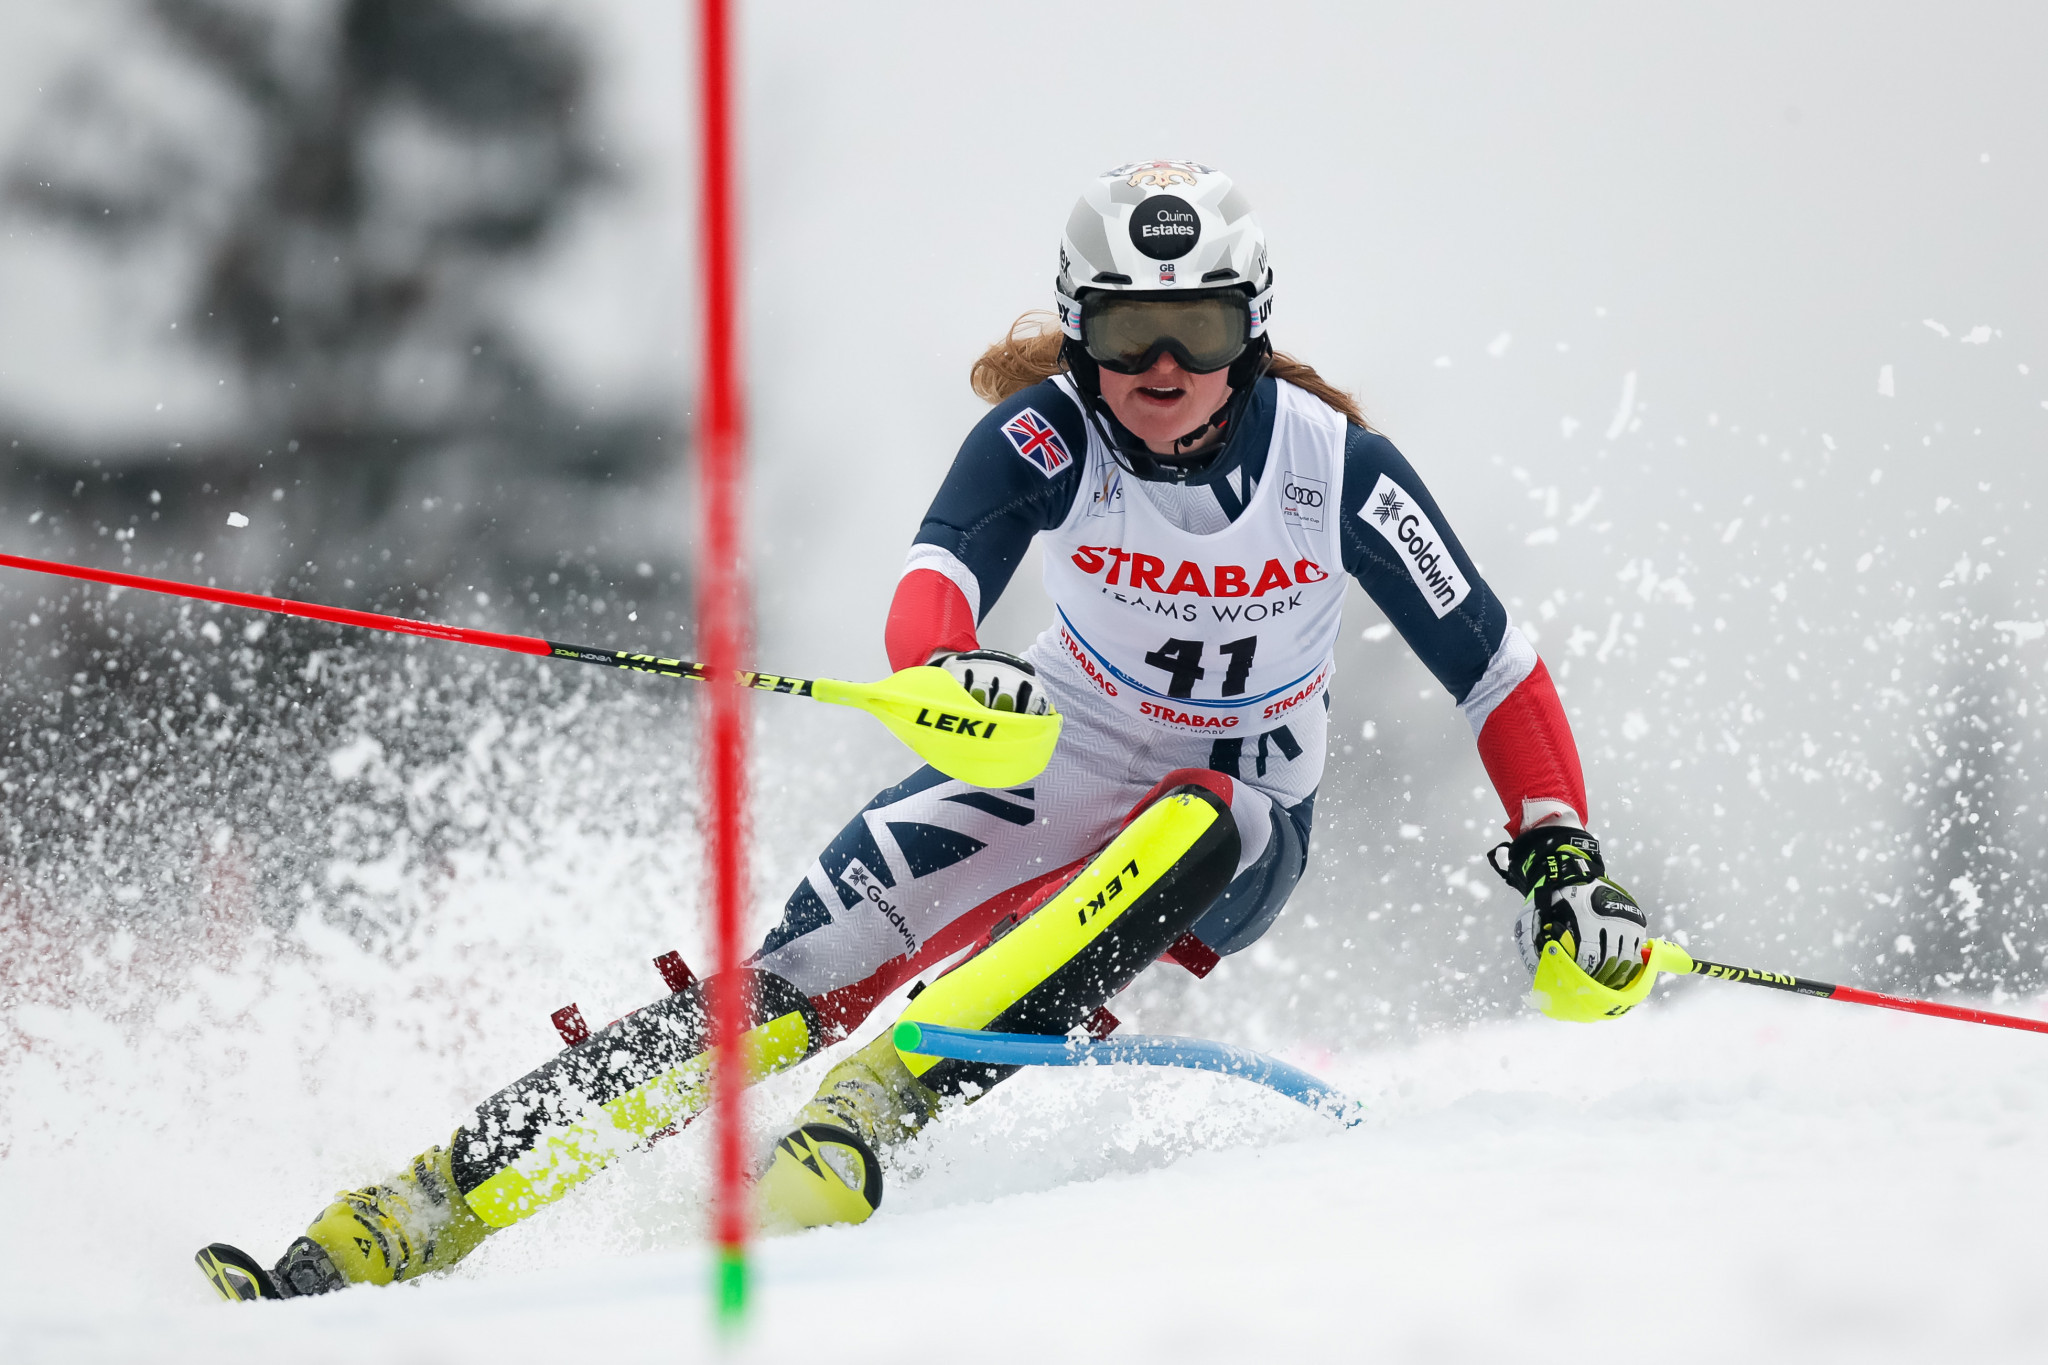 Charlie Guest, Britain's first female Alpine skier to win a Europa Cup race, will compete for her country in next season's FIS Alpine Ski World Cup ©Getty Images